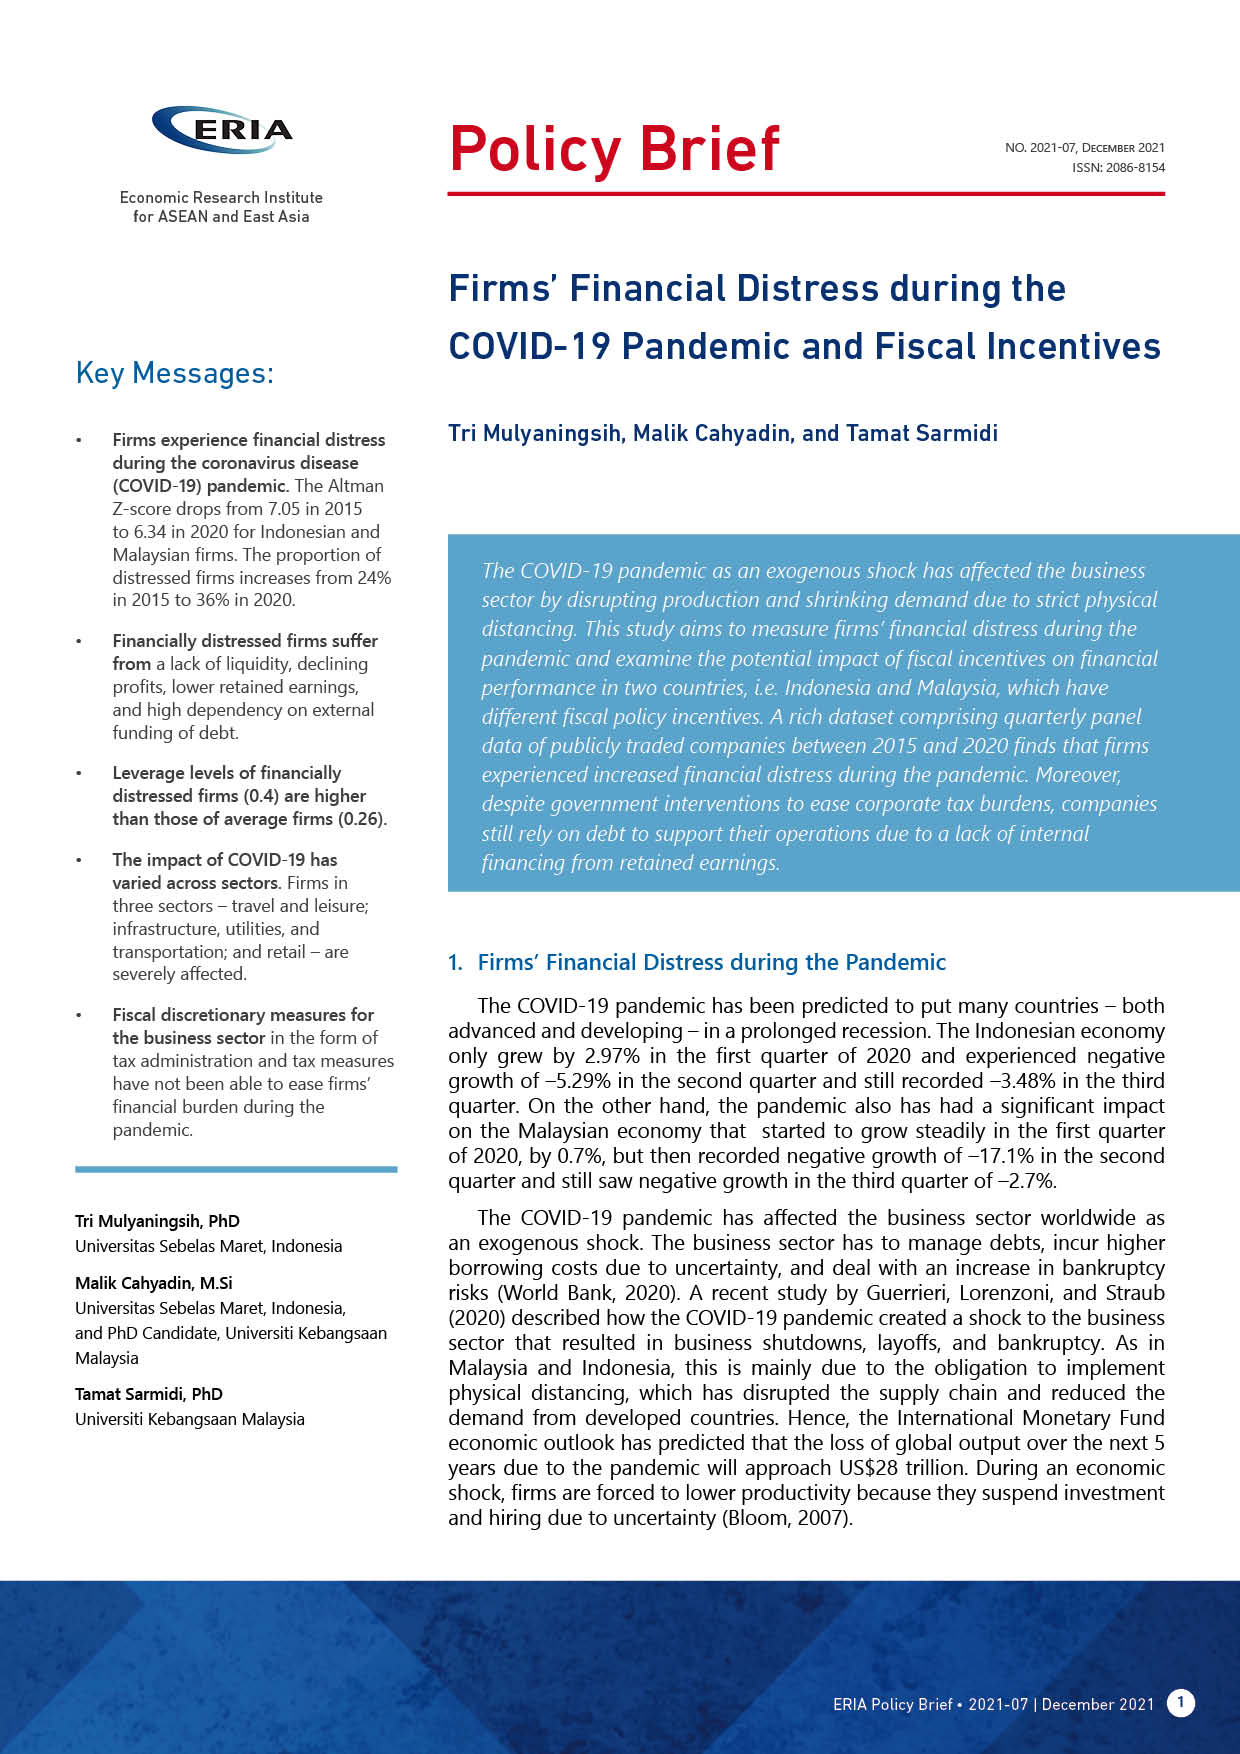 Firms’ Financial Distress during the COVID-19 Pandemic and Fiscal Incentives